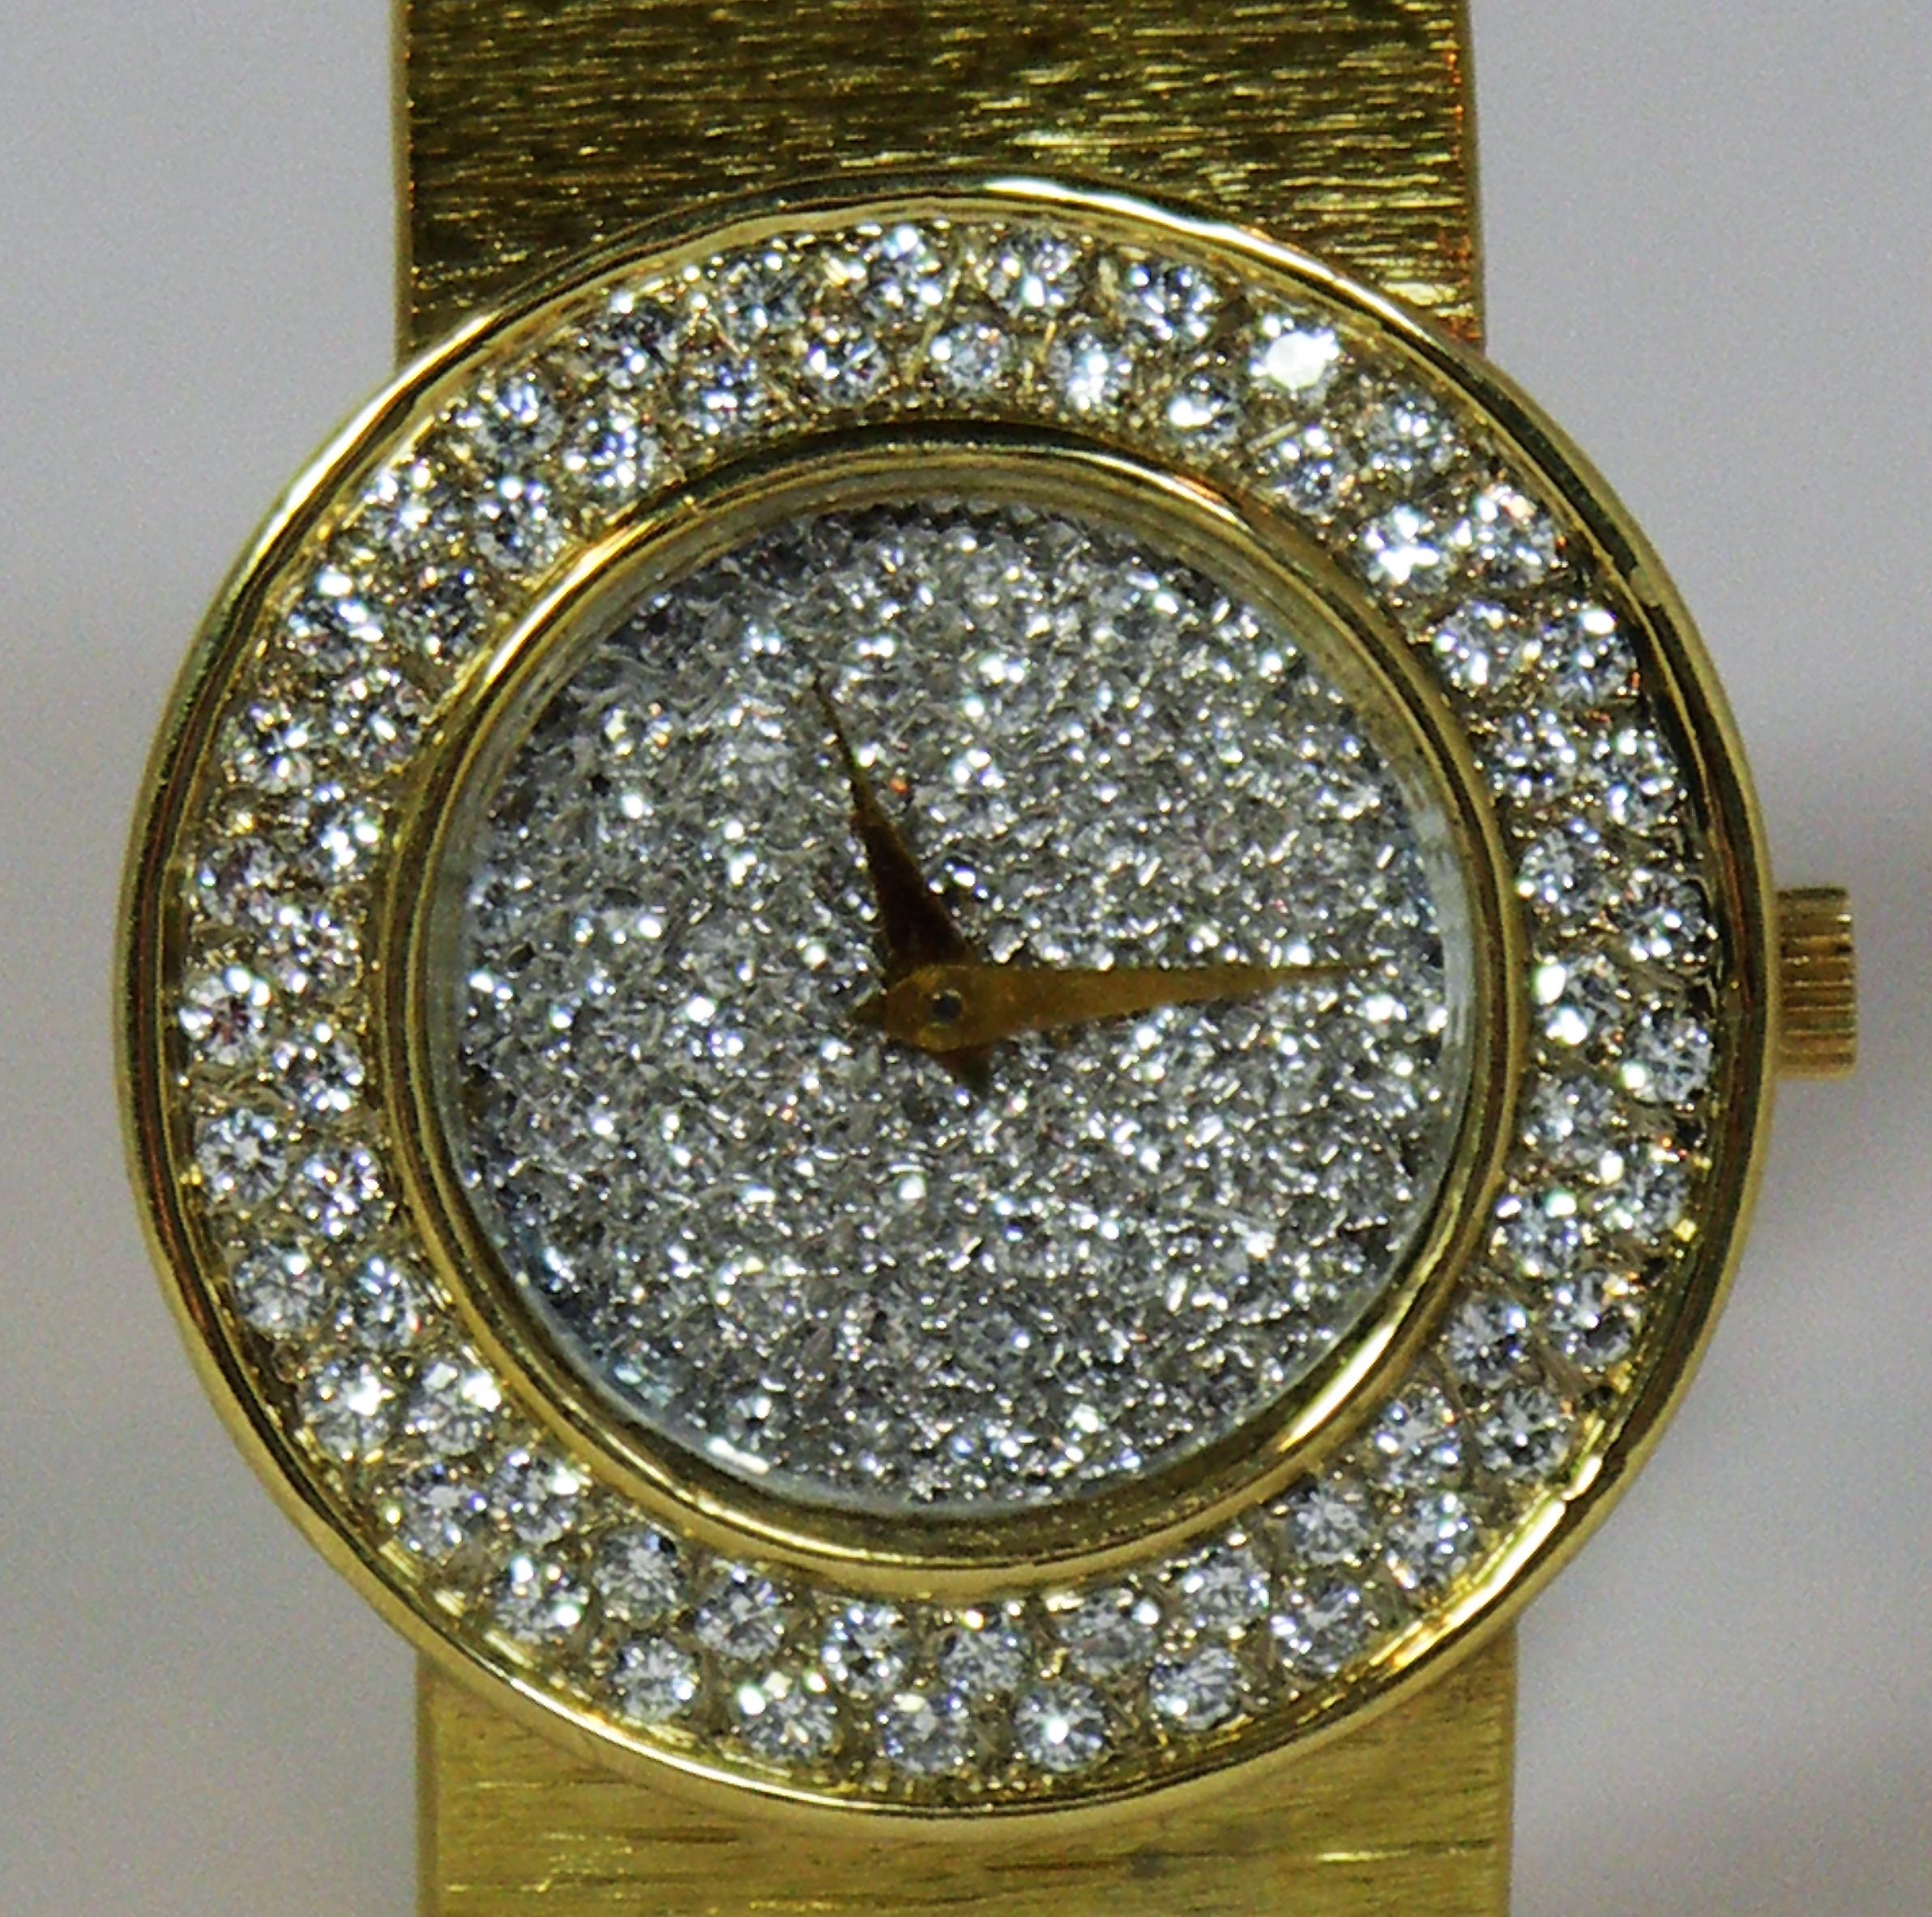 This elegant 18K yellow gold Bueche Girod is covered in diamonds both on the 
dial and the bezel. The total approximate diamond weight is 2.75ct of overall G/H
color and VS1 clarity. The round head measures 1 1/8